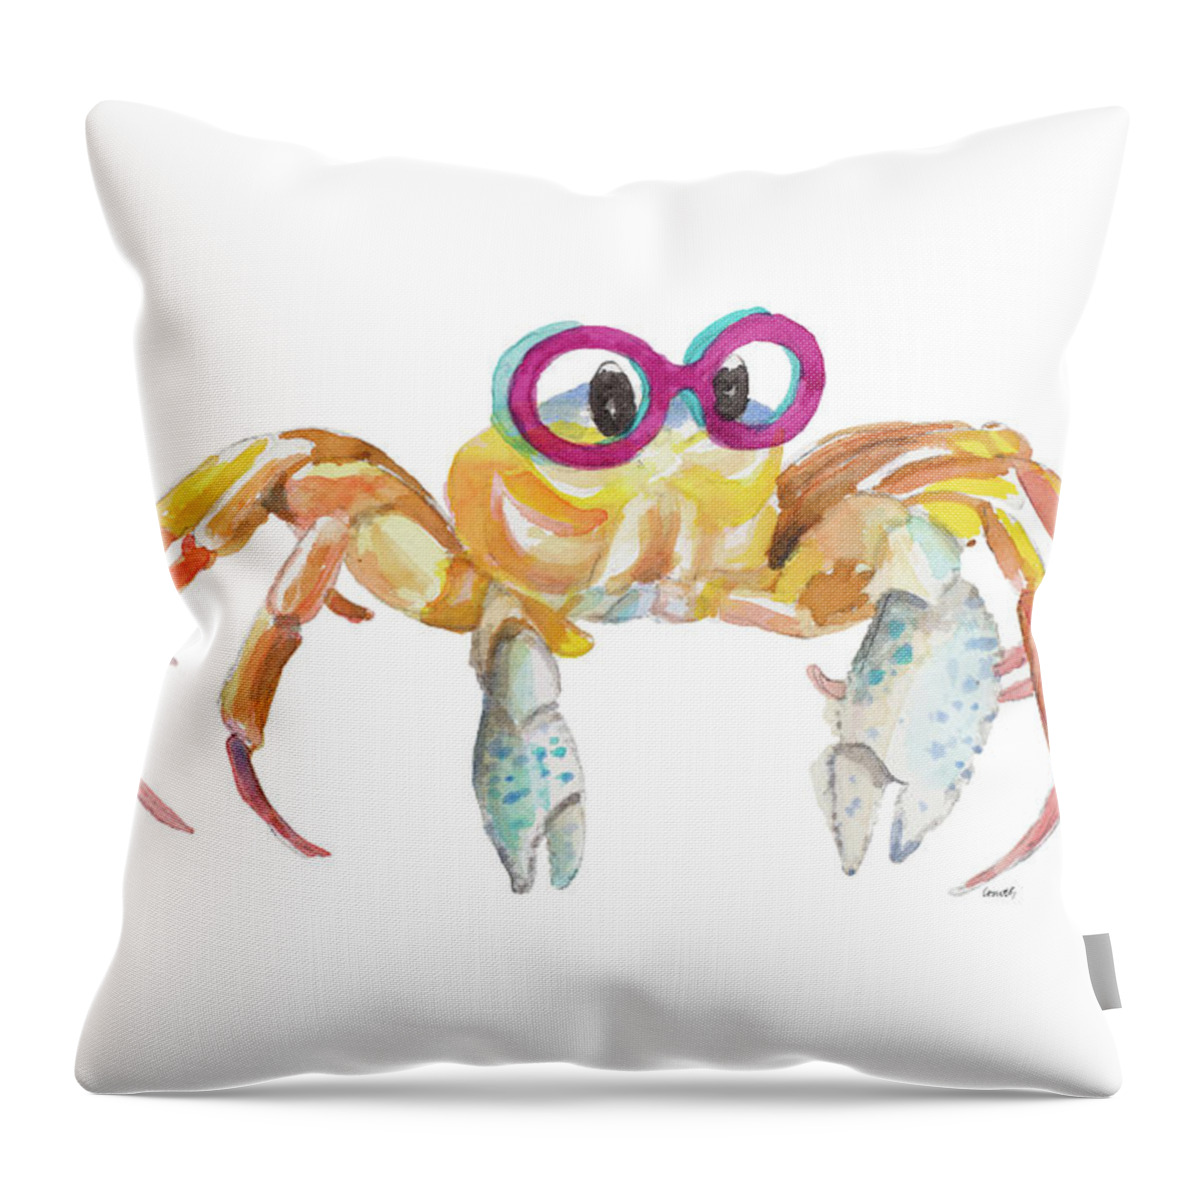 Crab Throw Pillow featuring the painting Crab With Glasses by Lanie Loreth